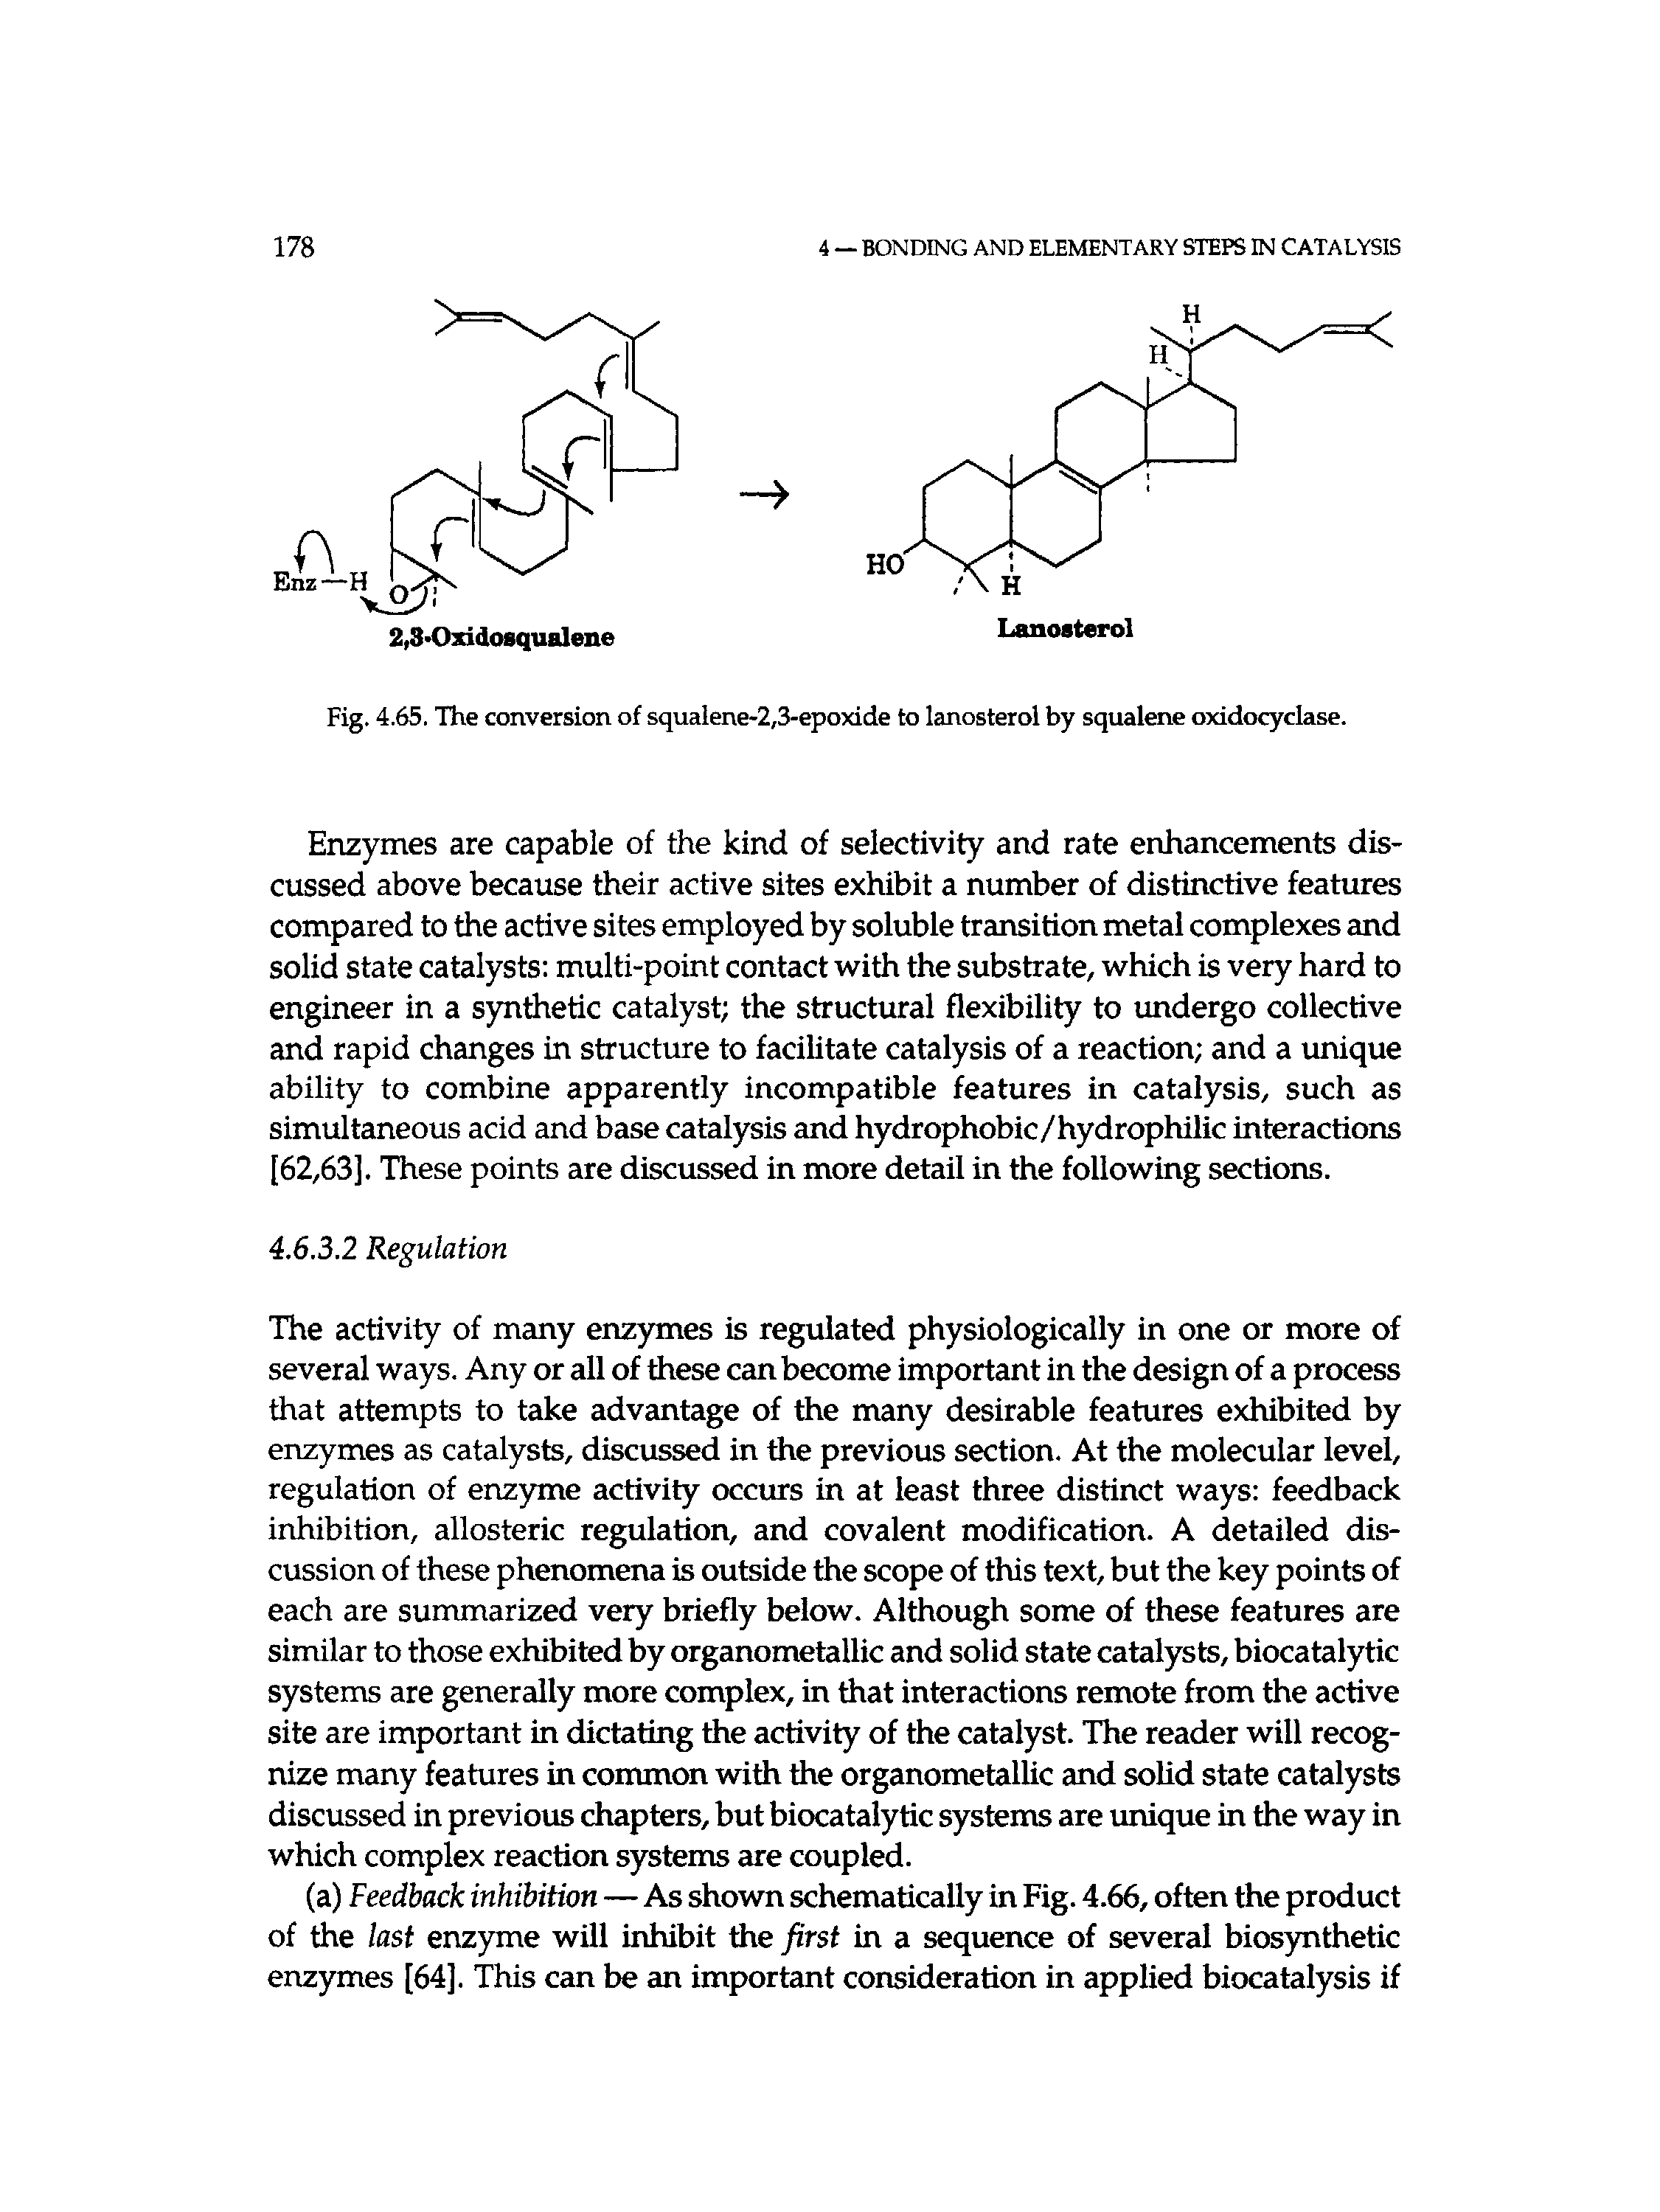 Fig. 4.65. The conversion of squalene-2,3-epoxide to lanosterol by squalene oxidocyclase.